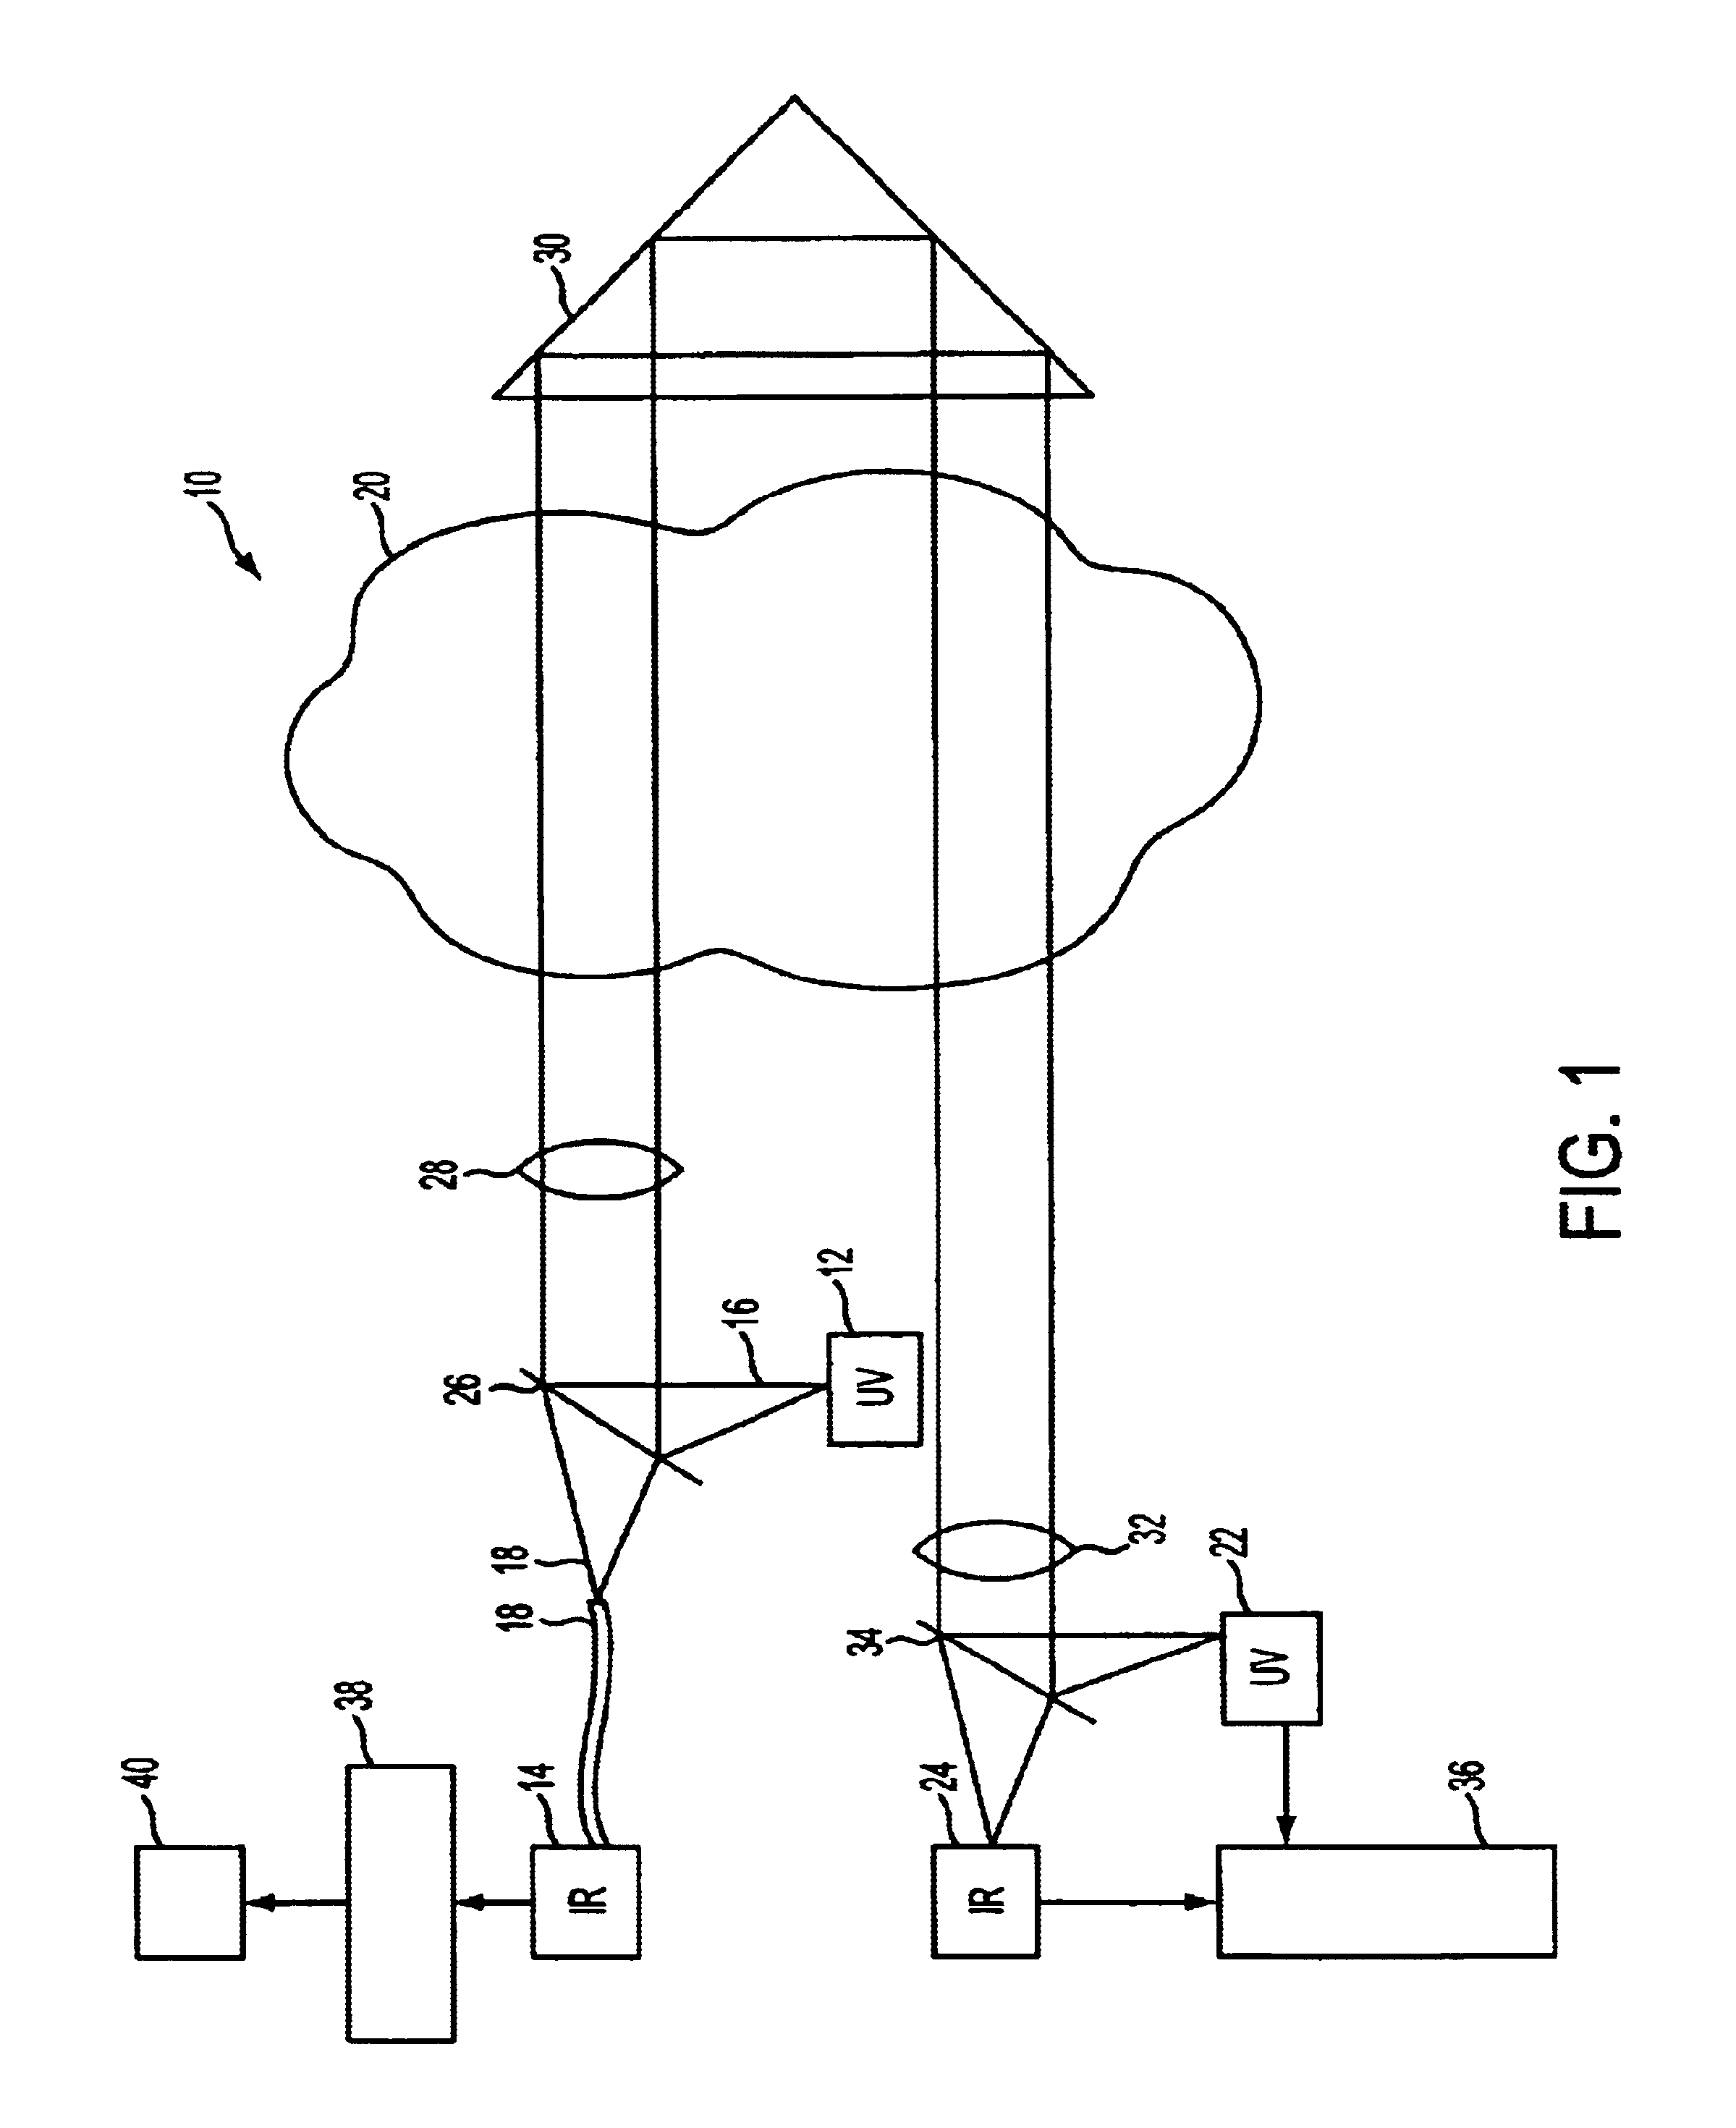 Method and apparatus for measuring particulates in vehicle emissions